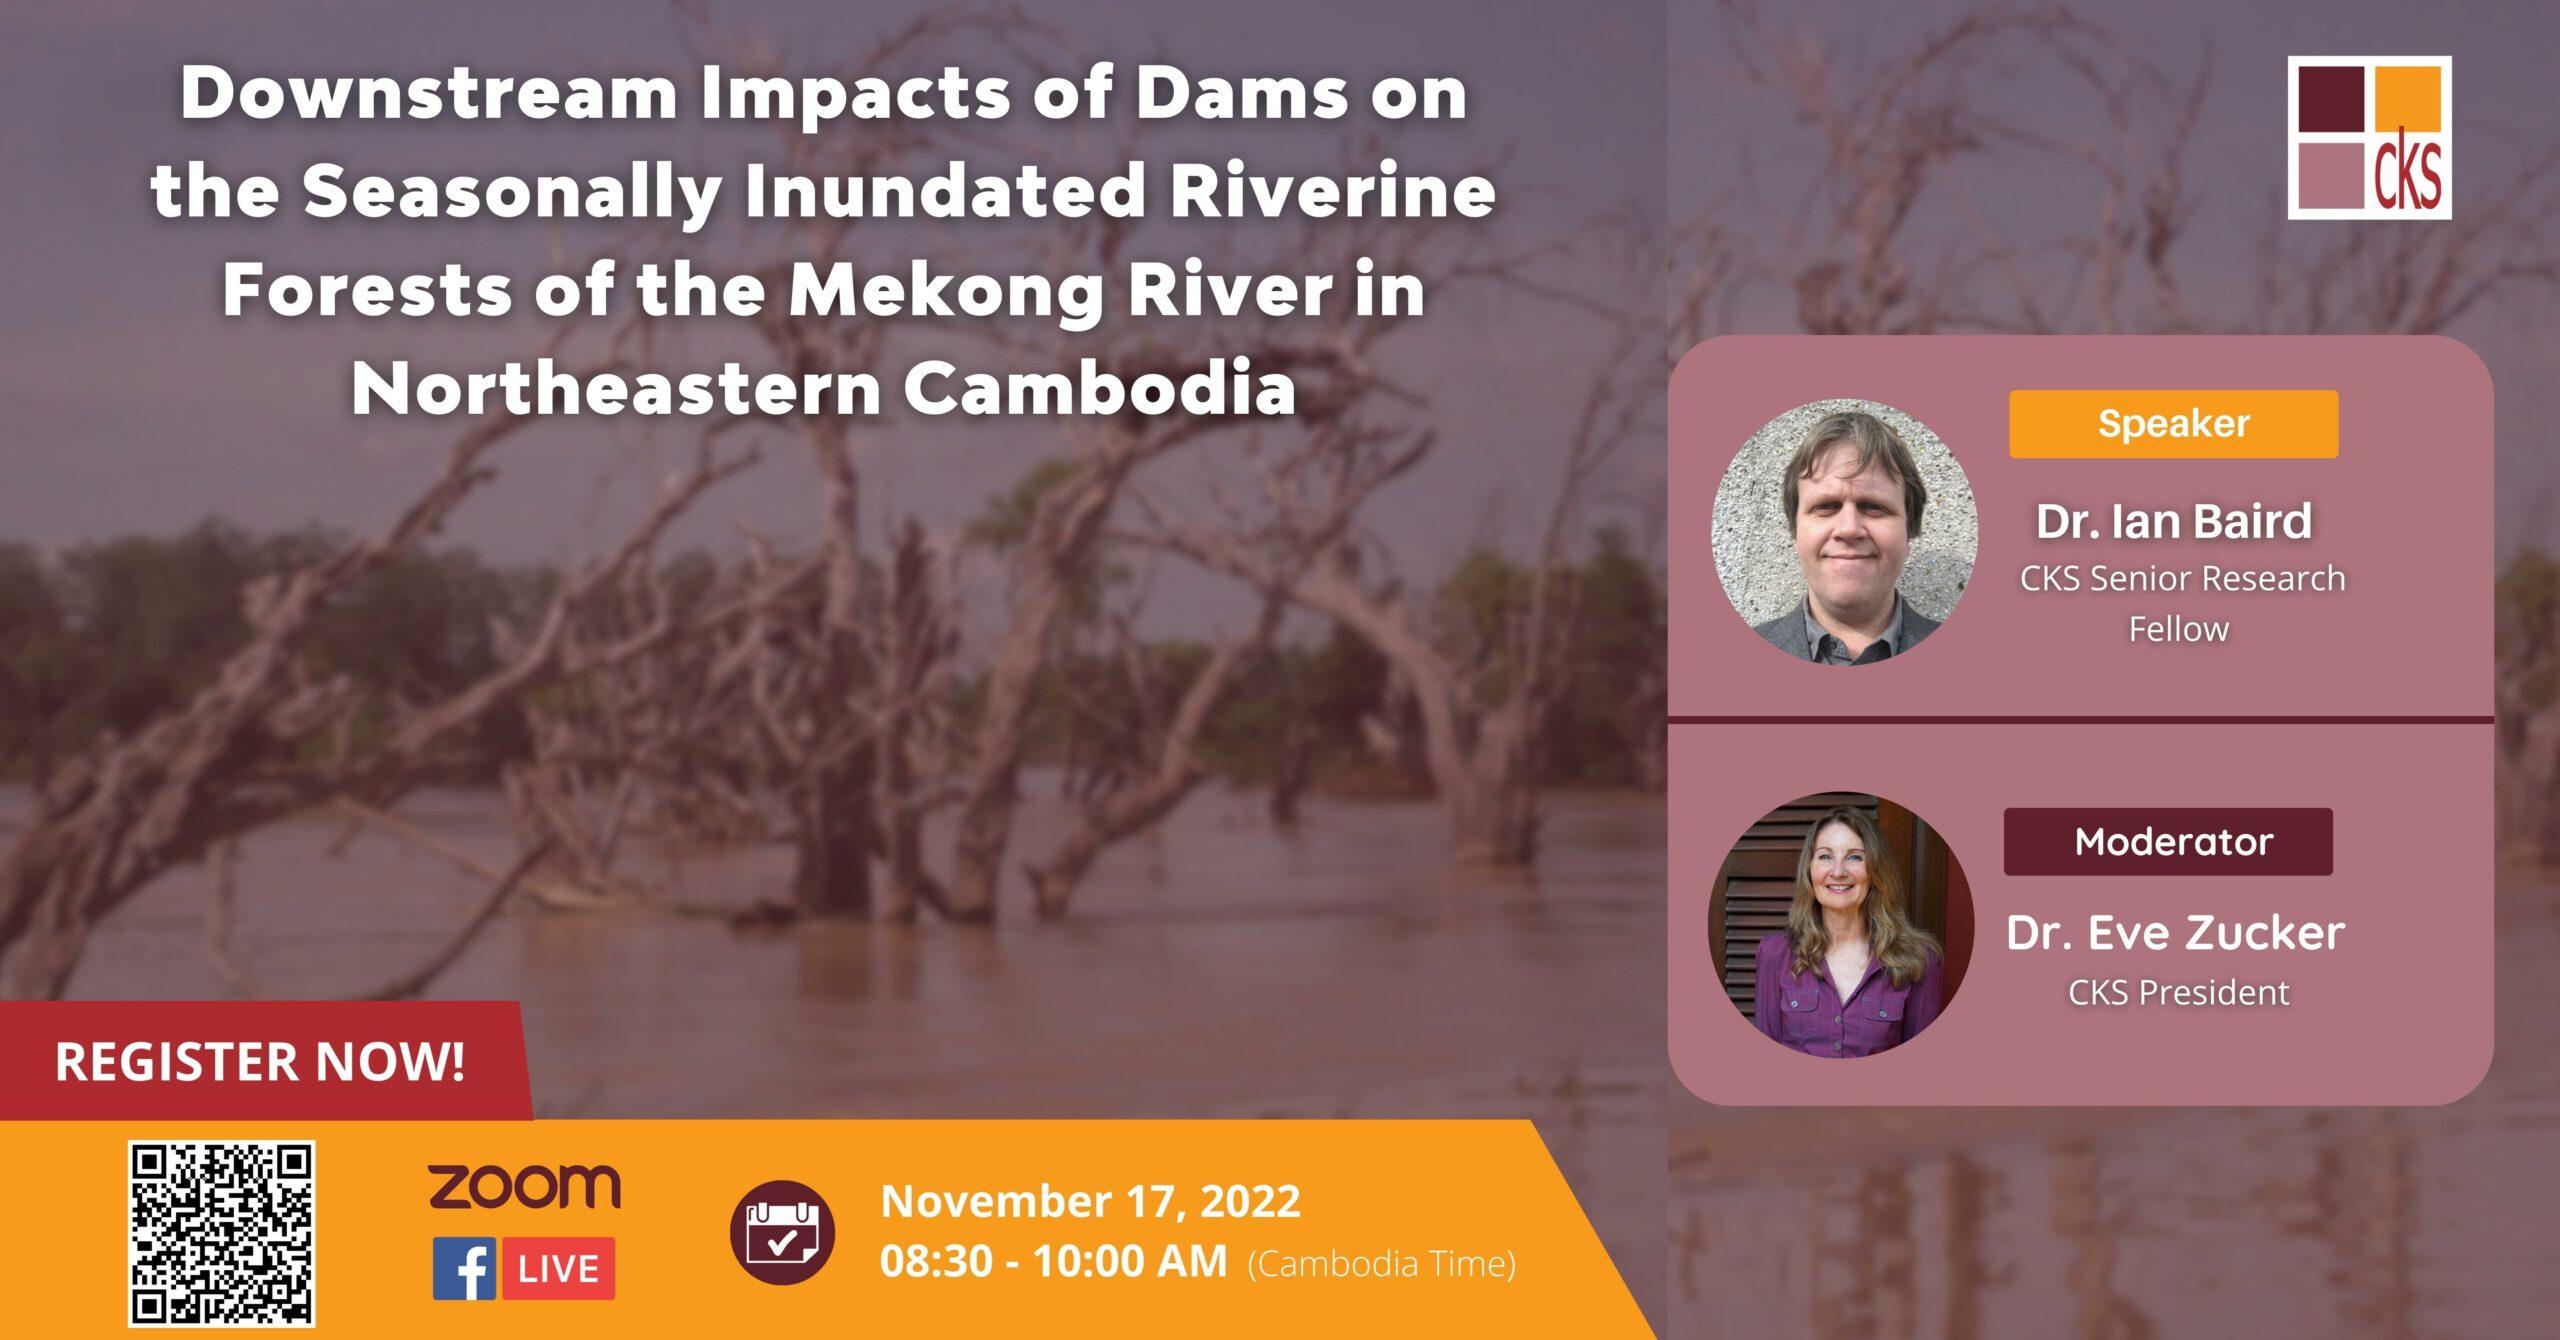 Downstream Impacts of Dams on the Seasonally Inundated Riverine Forests of the Mekong River in Northeastern Cambodia | Webinar with Dr. Ian Baird